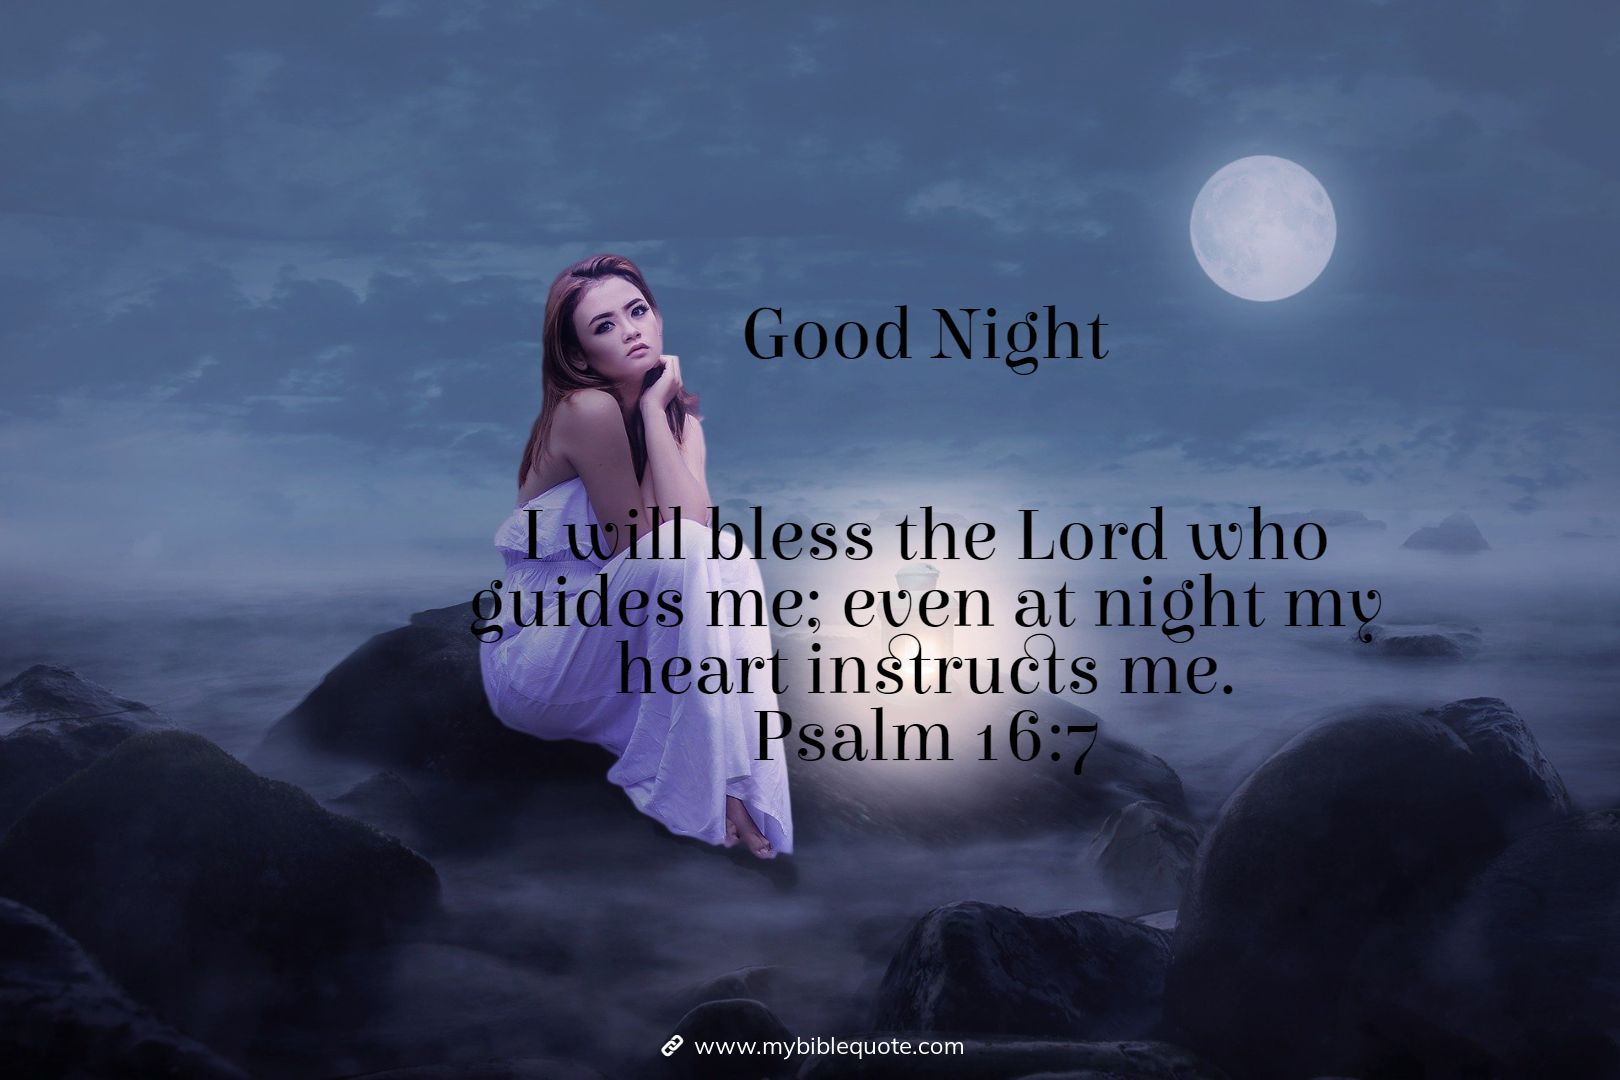 Good Night Bible Verses Images: End Your Day with Peace and Inspiration